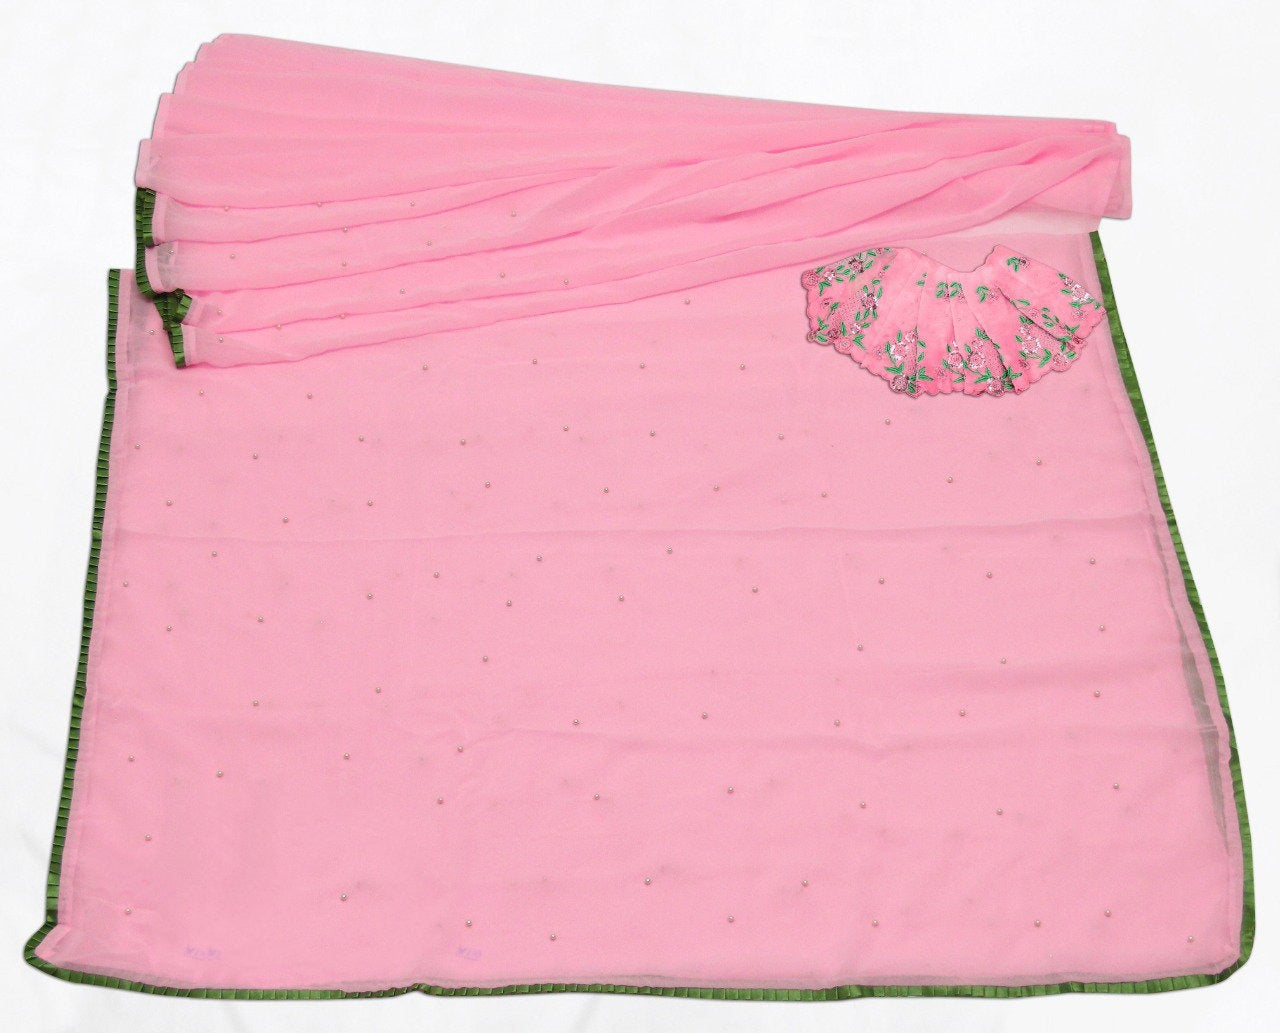 Baby pink georgette pearl work saree with long choli